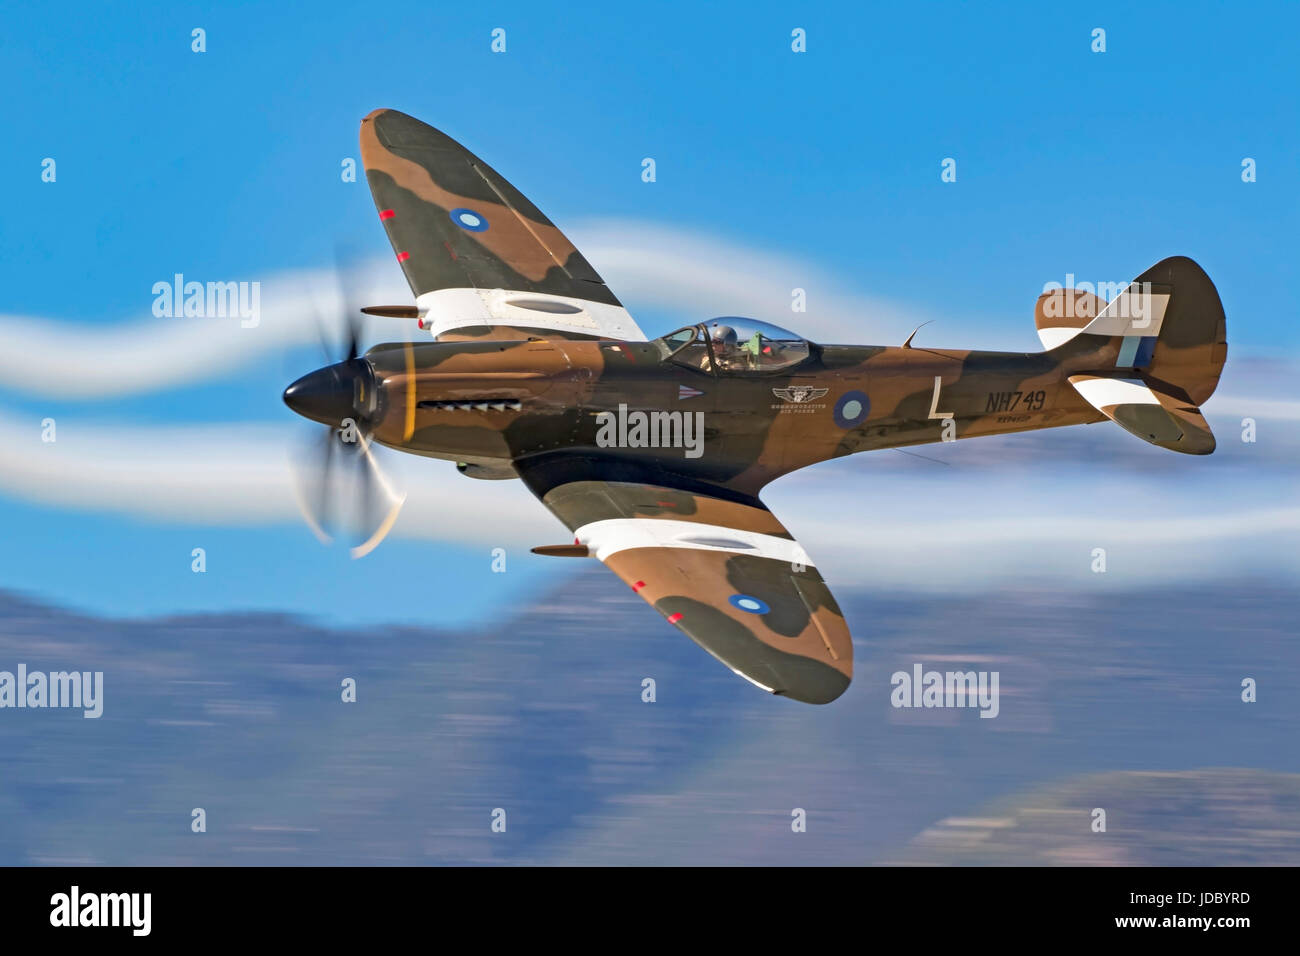 Airplane WWII British Spitfire vintage aircraft flying Stock Photo